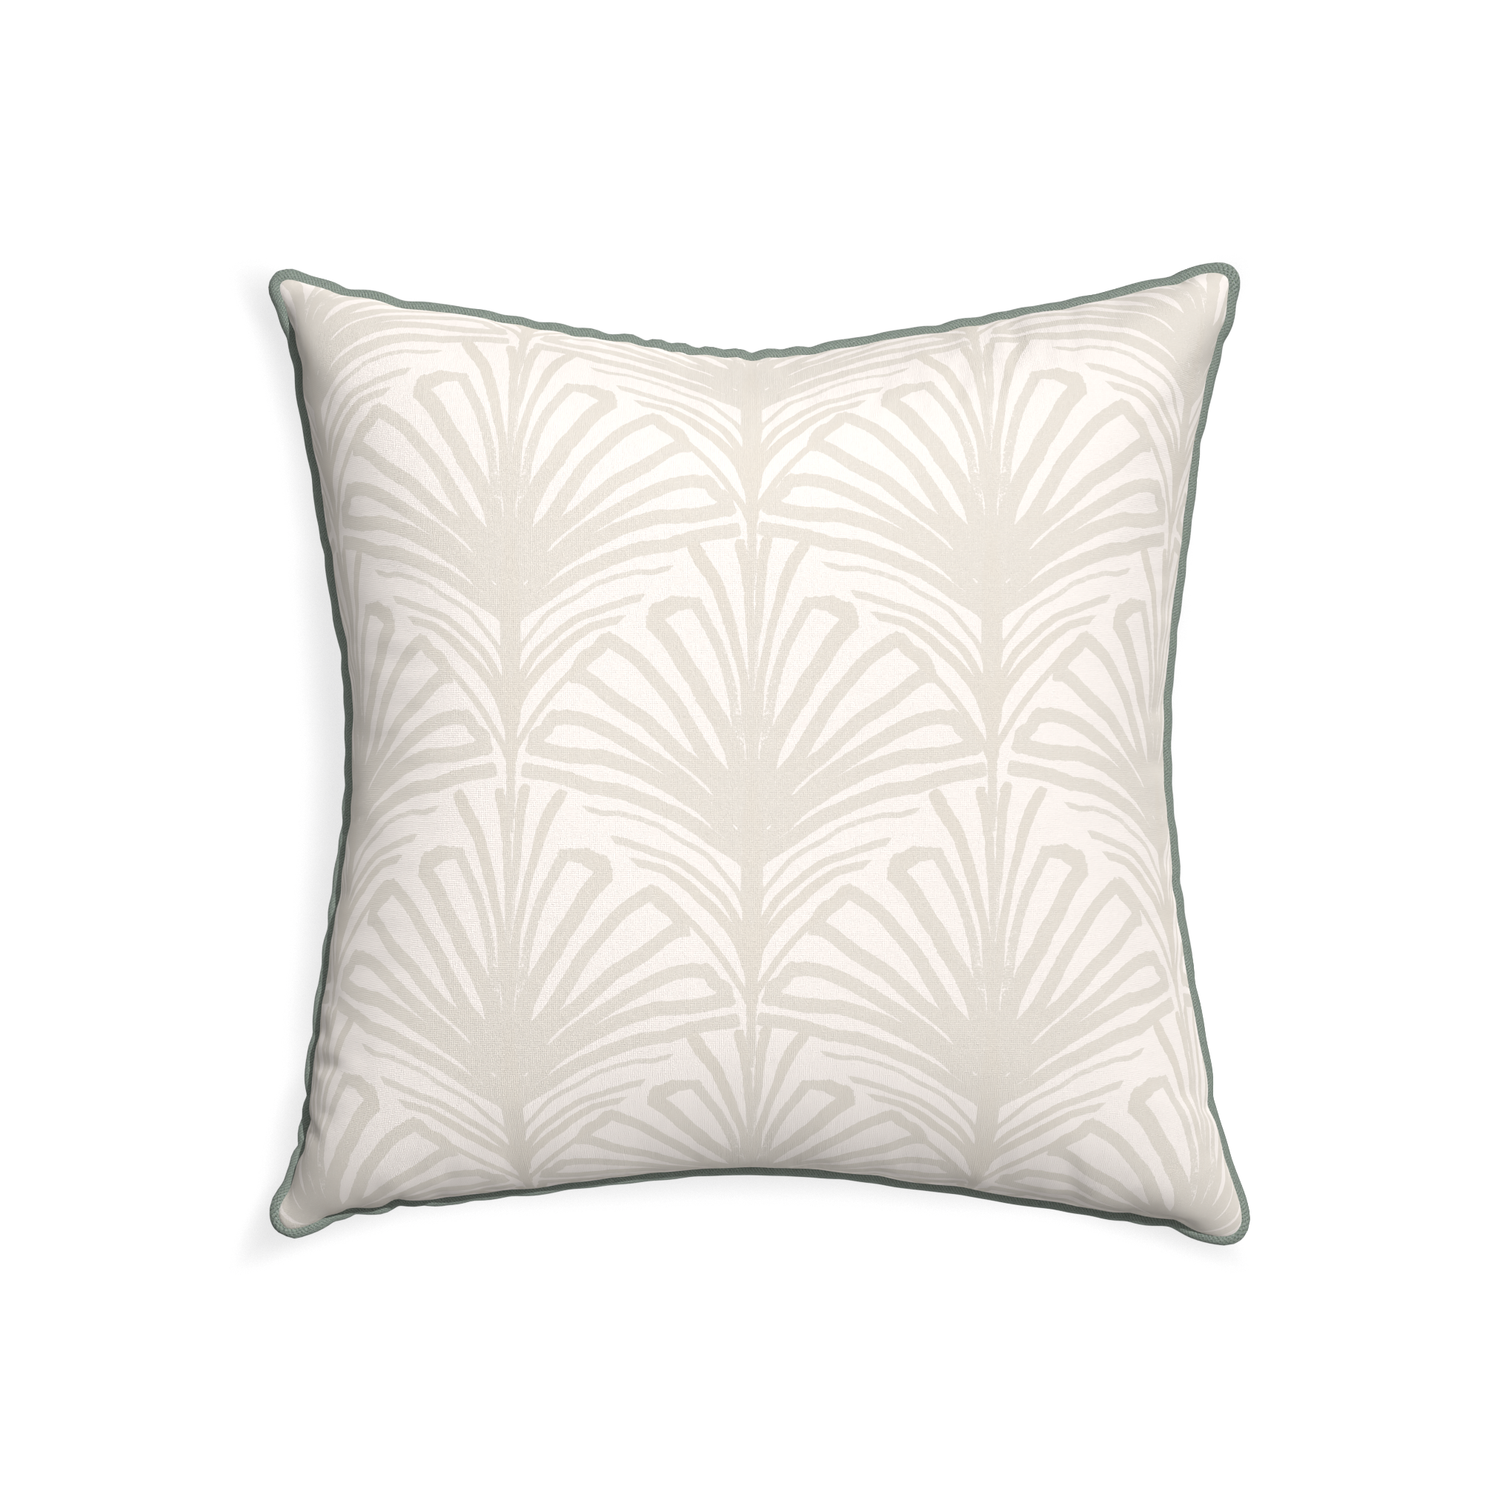 22-square suzy sand custom beige palmpillow with sage piping on white background